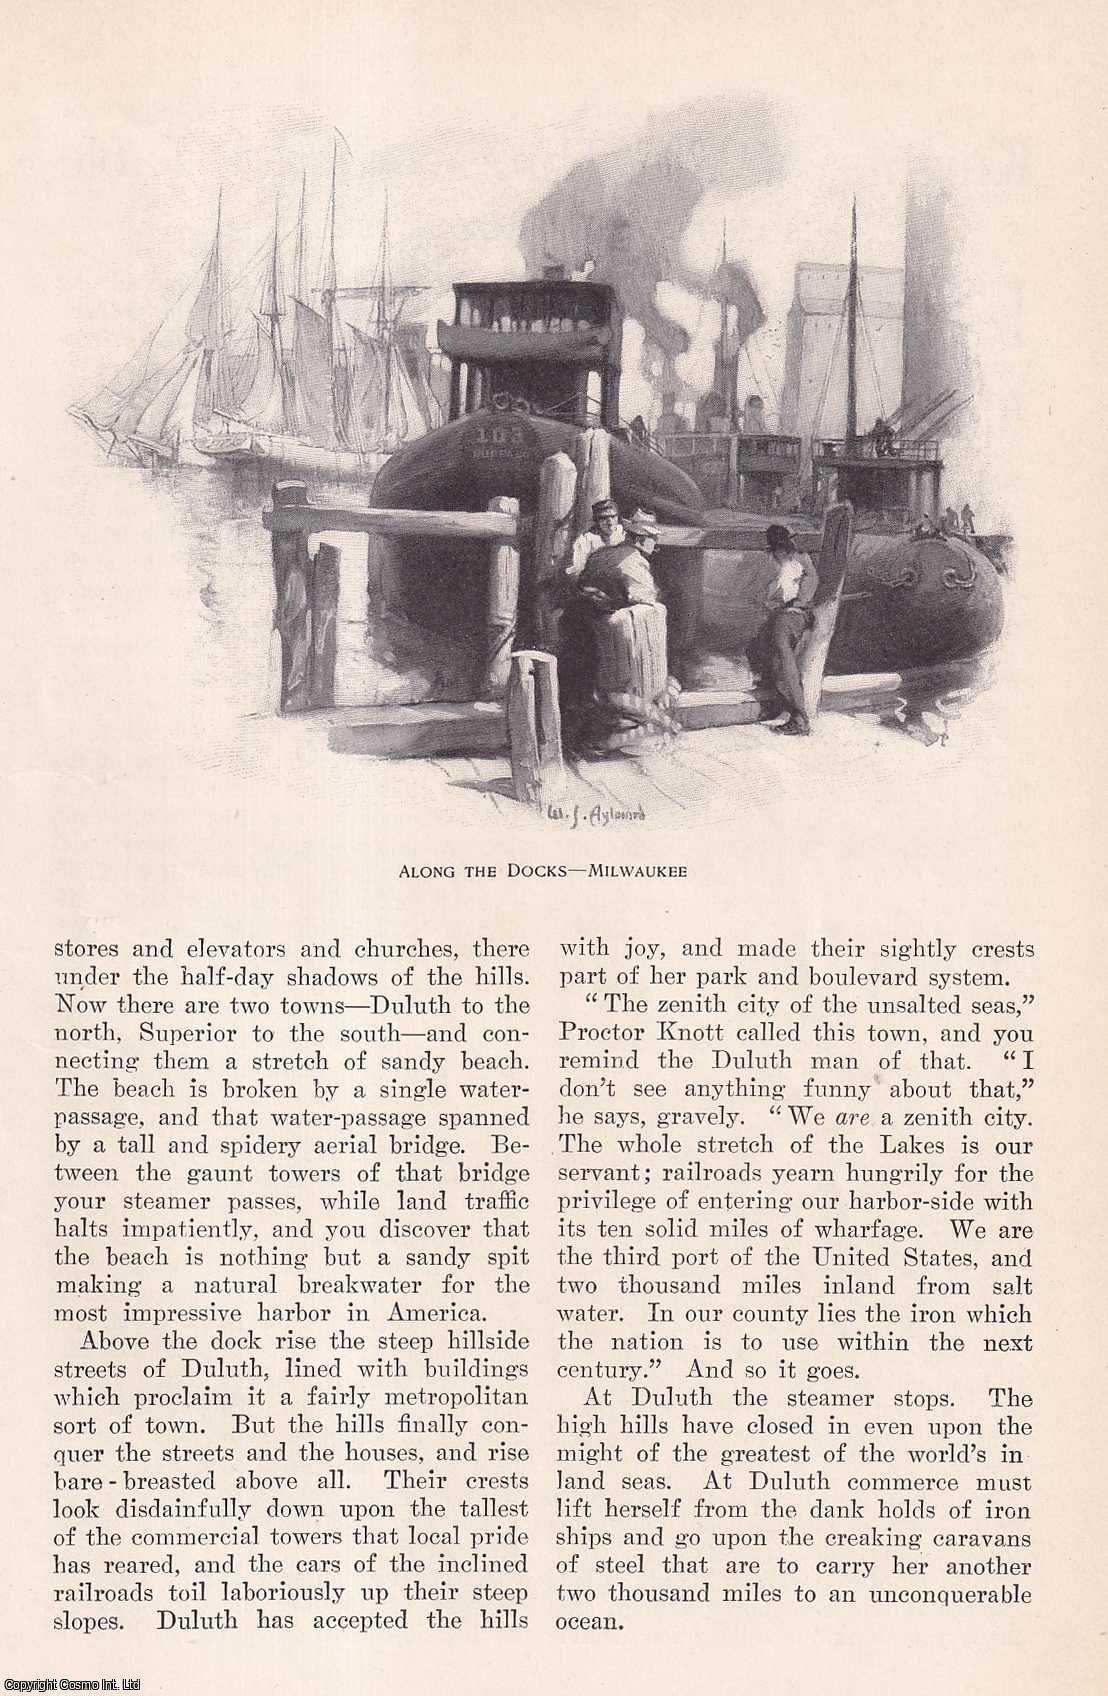 Edward Hungerford - Up the Lakes: The Cargoes, Schooners, Freight and Shipping of the Great Lakes. This is an original article from the Harper's Monthly Magazine, 1913.